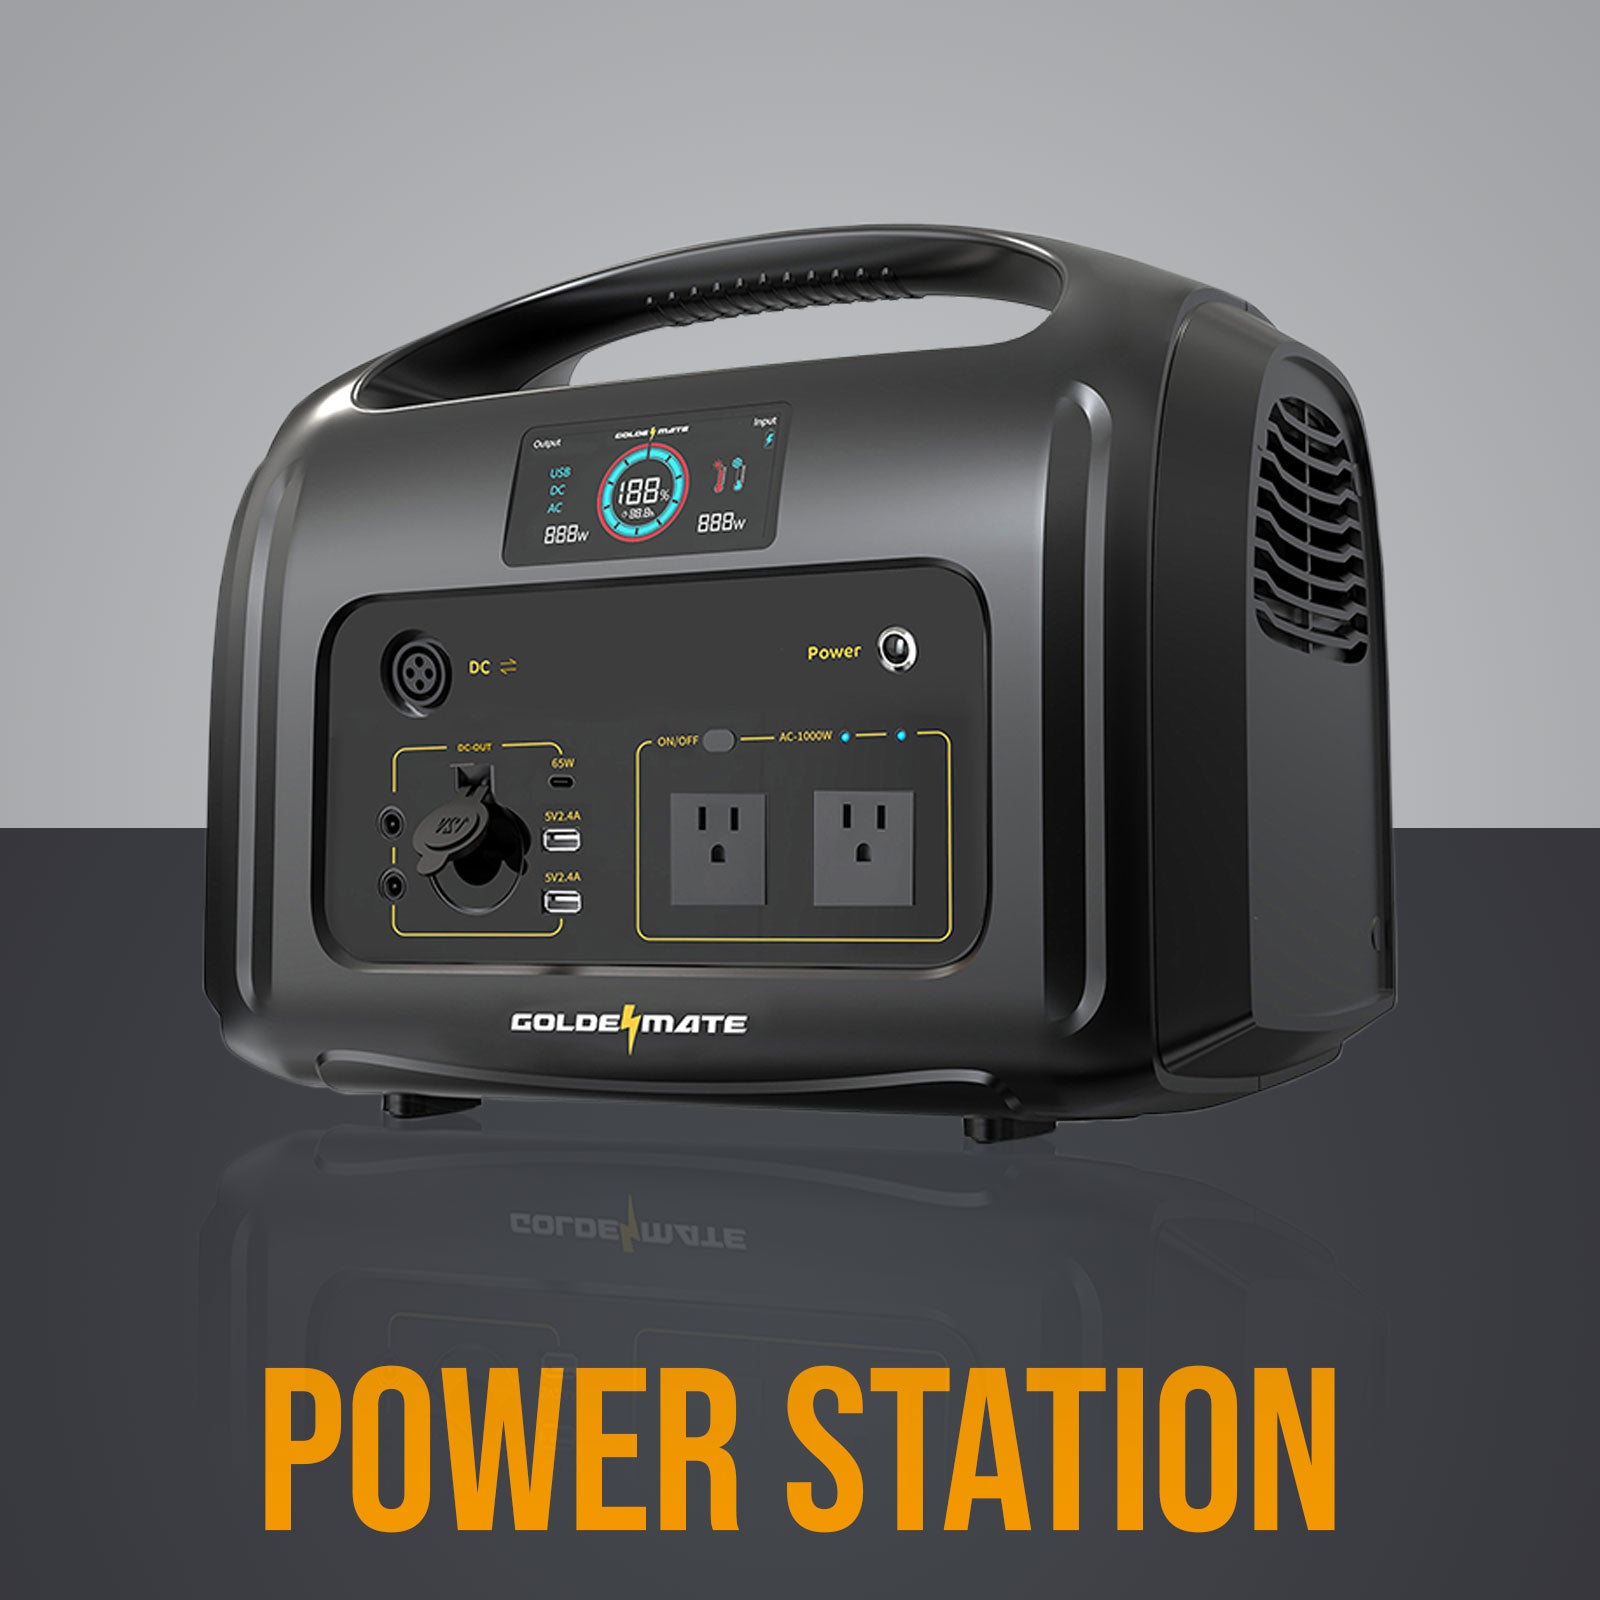 1000Wh Lifepo4 Portable Power Station